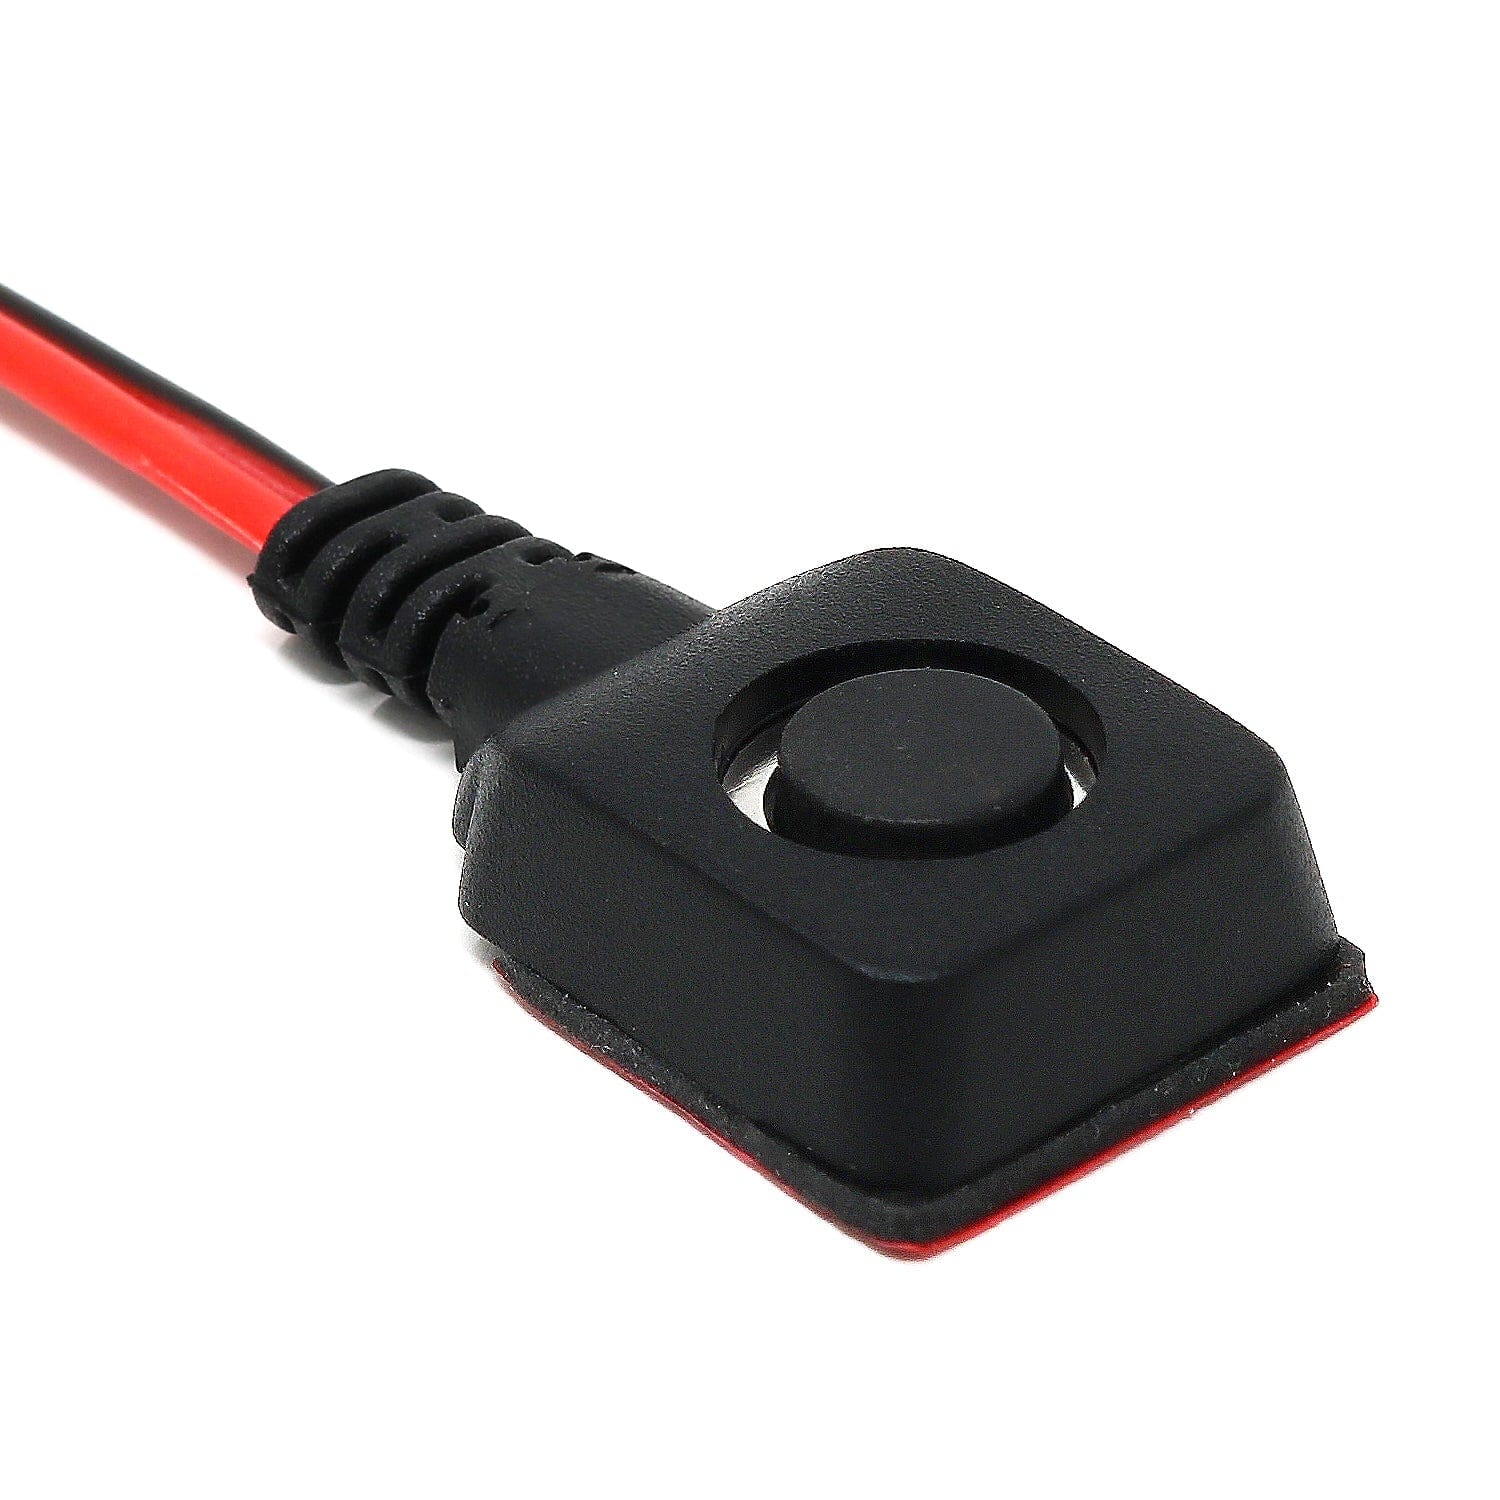 Wired Self-adhesive Momentary Pushbutton